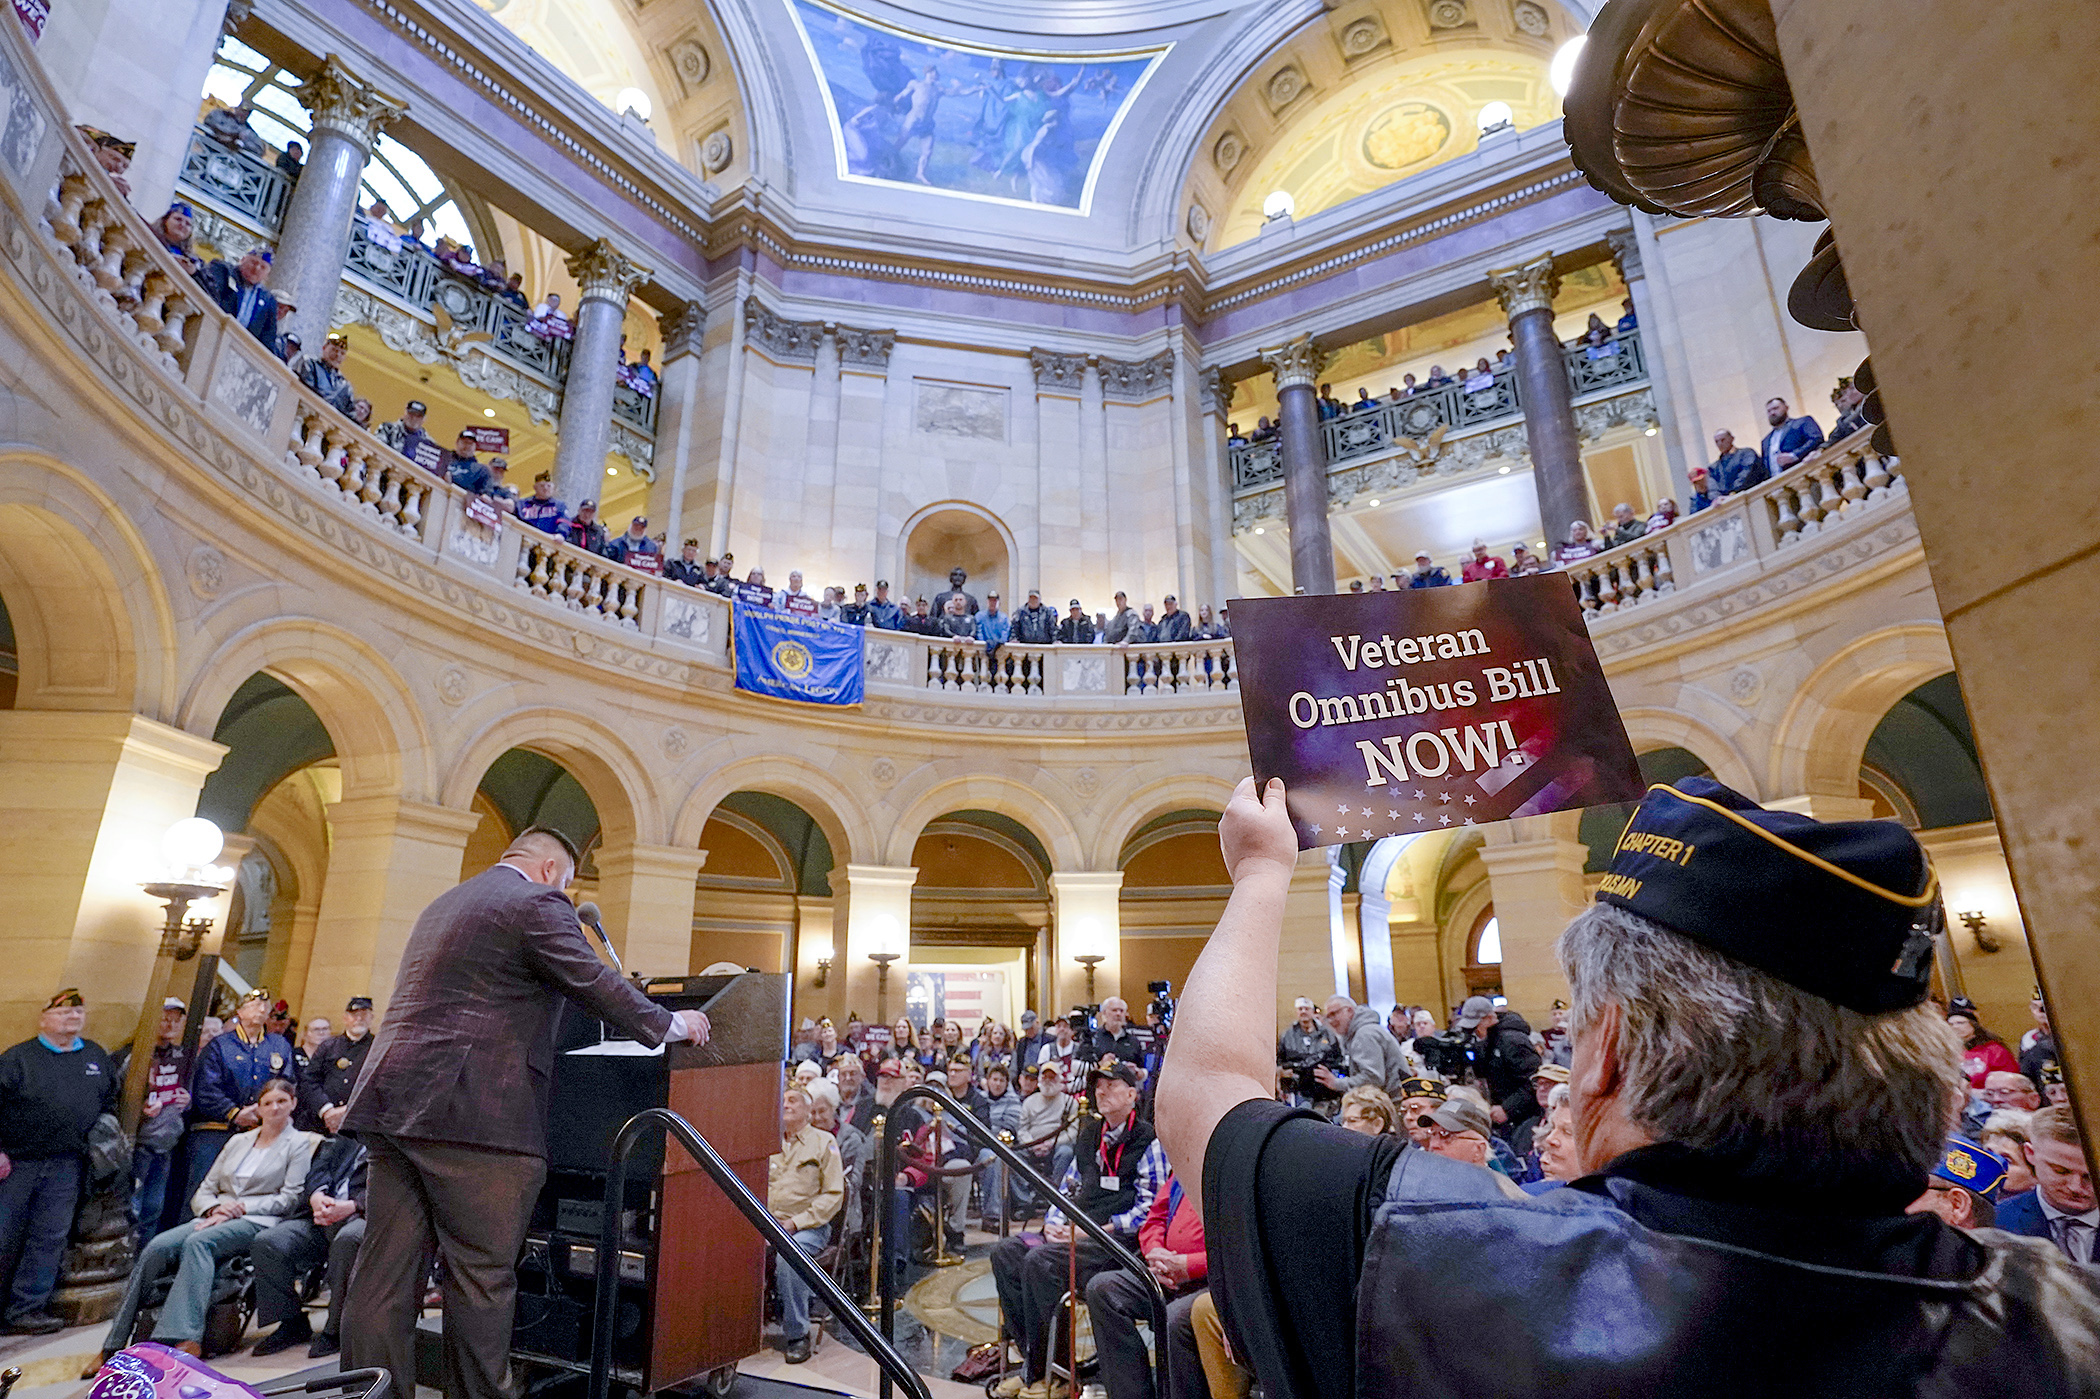 Hundreds of veterans and their supporters rallied in the Capitol Rotunda for Veterans Day on the Hill April 17. (Photo by Michele Jokinen)